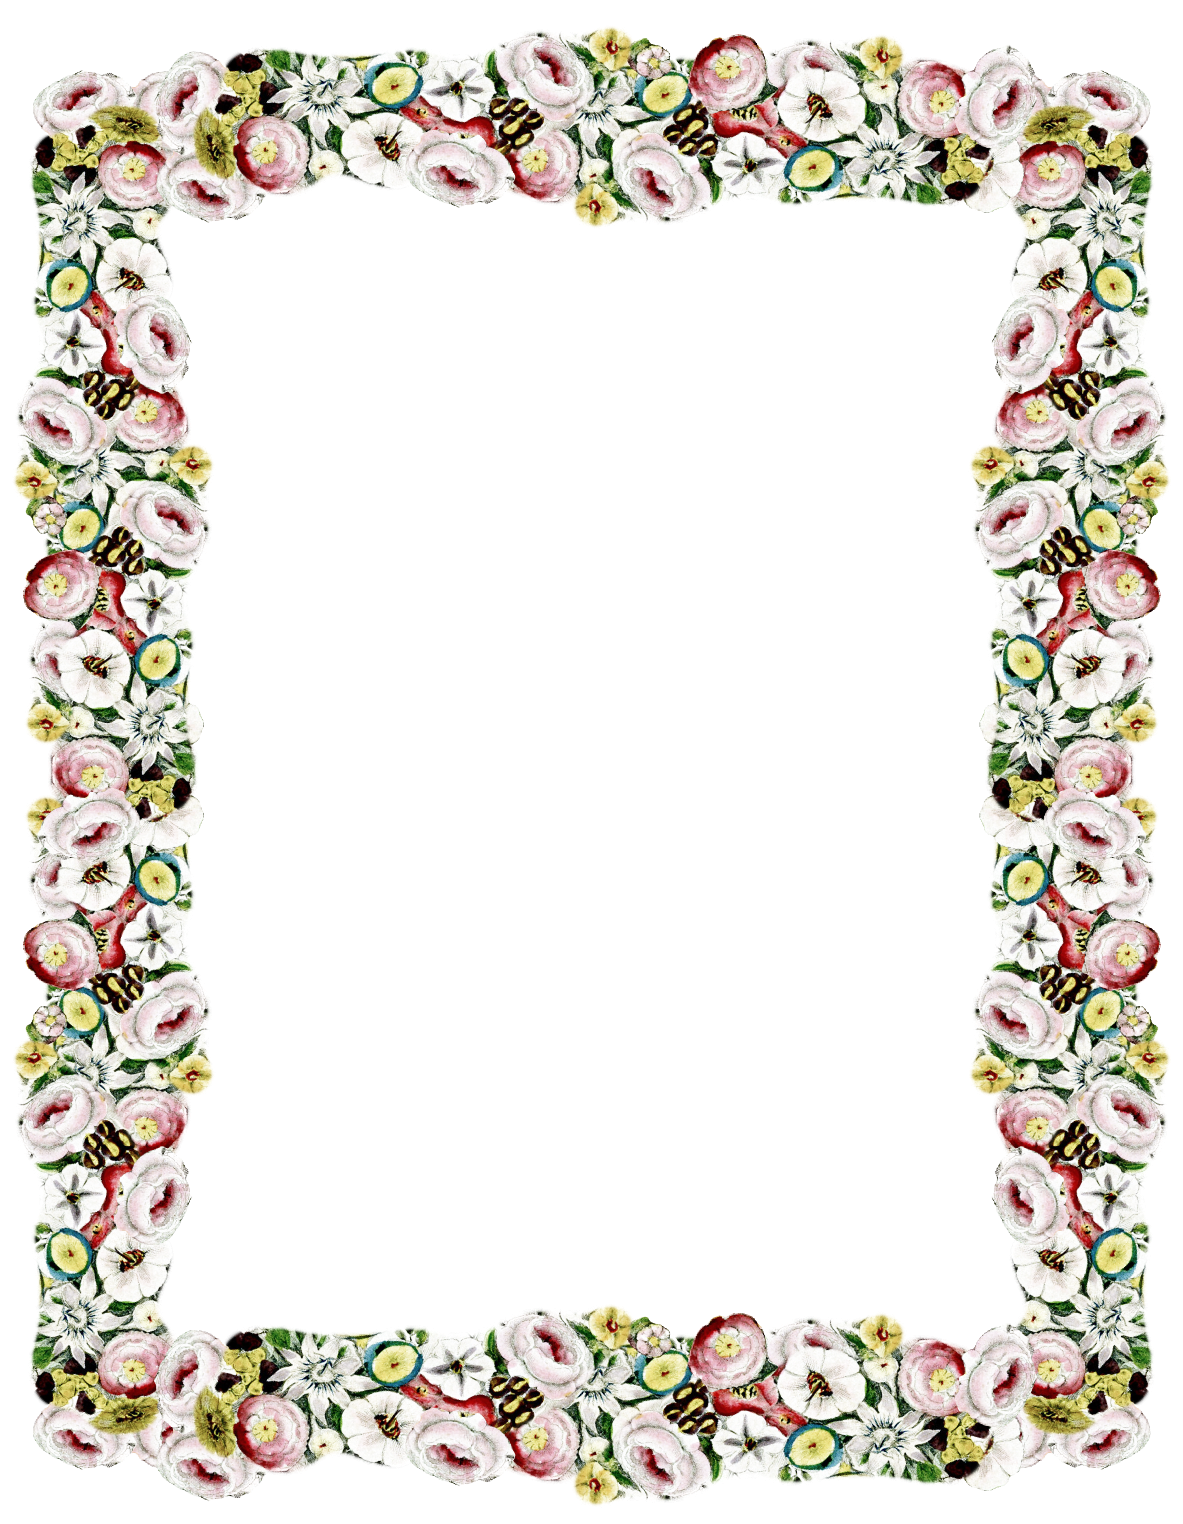 Free - Vintage Rose Borders And Frames (1183x1524)